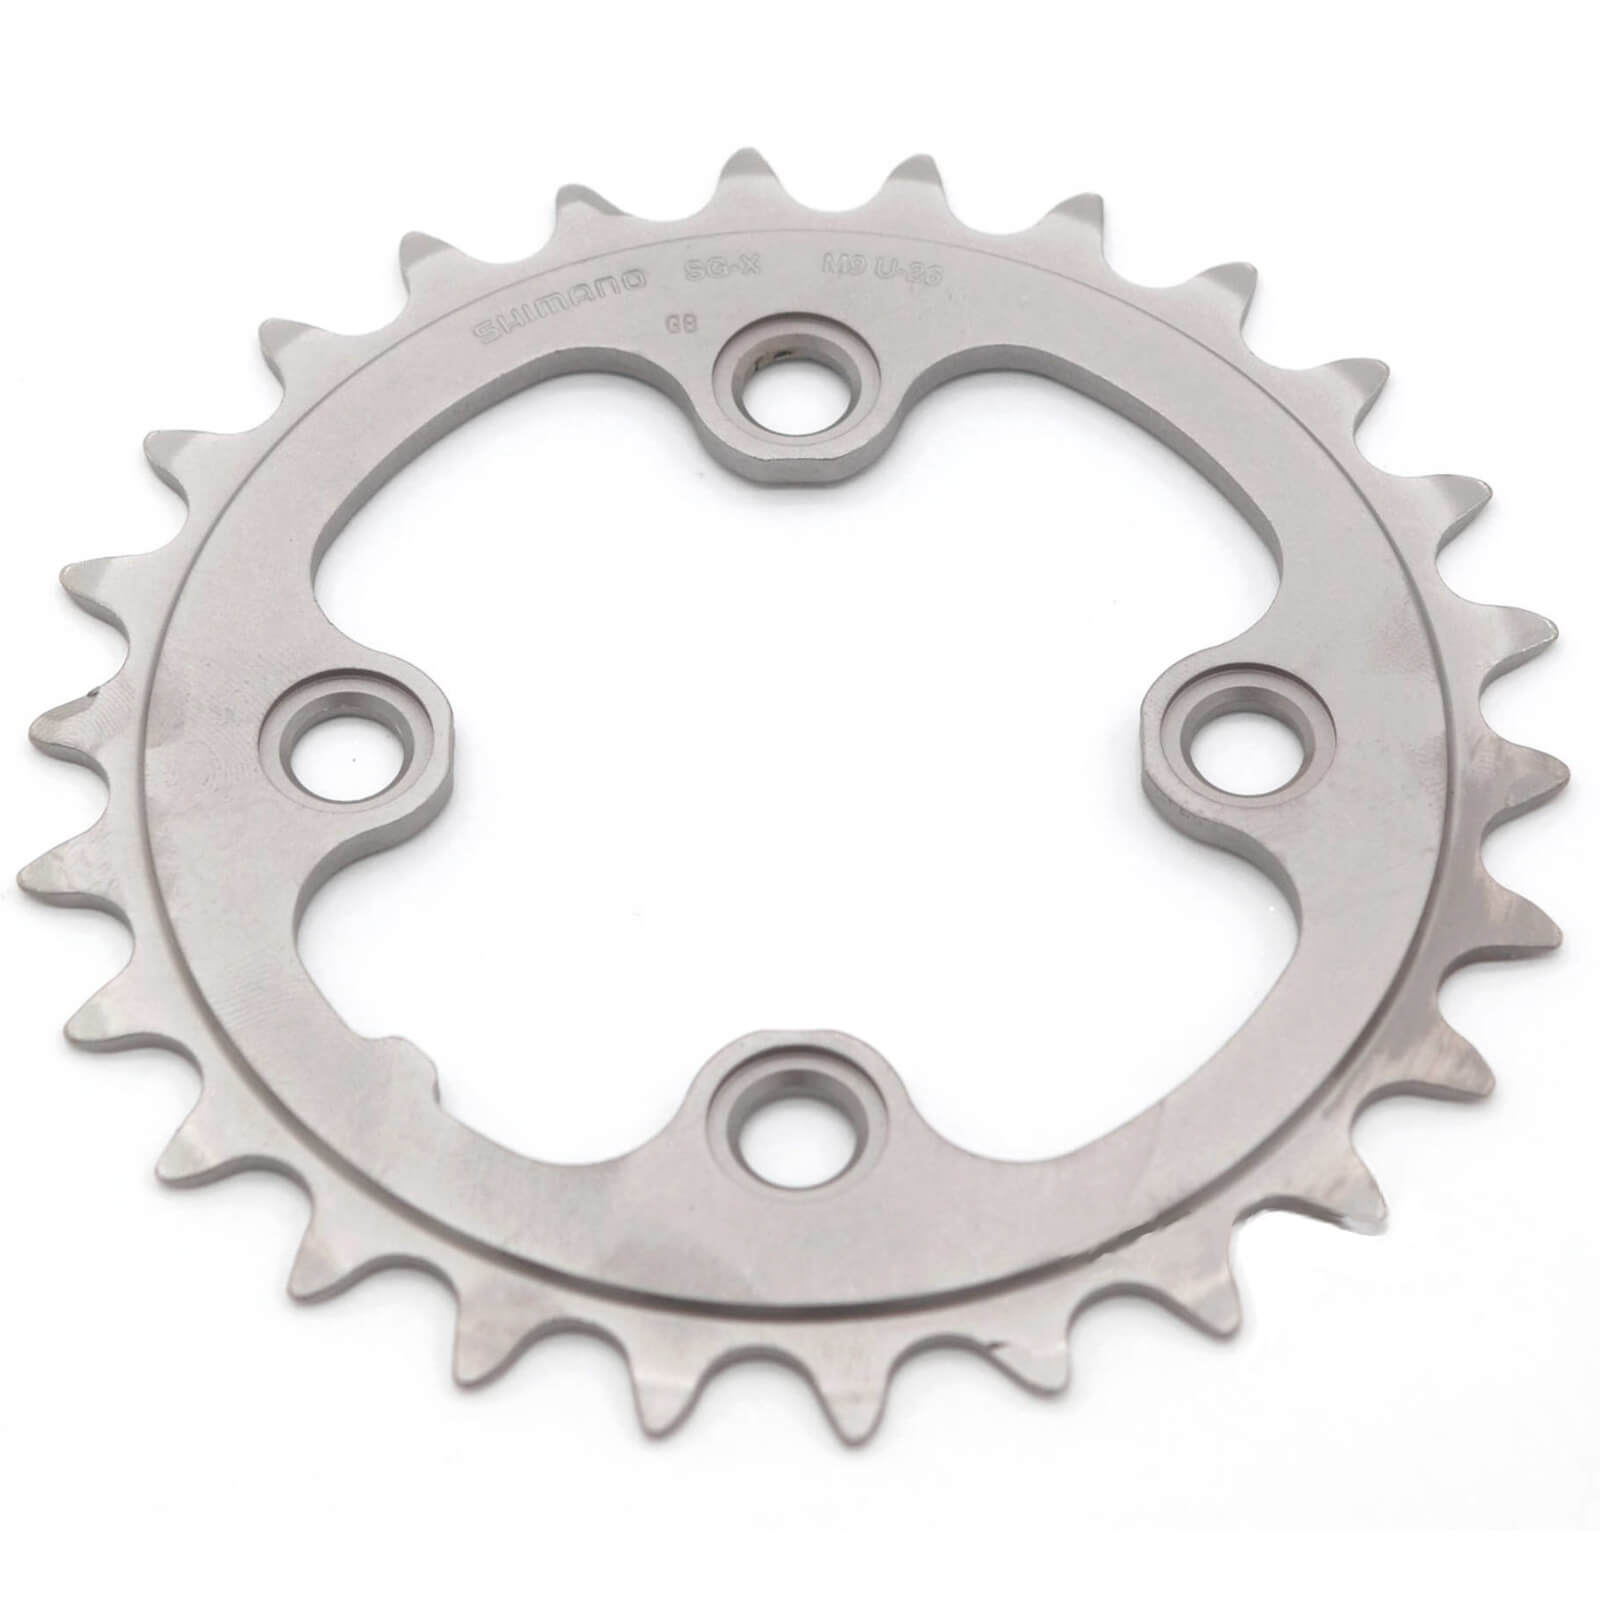 Shimano FC-3403 130BCD 5 Arm 39T Triple Bike Middle Chainring Alternate 1